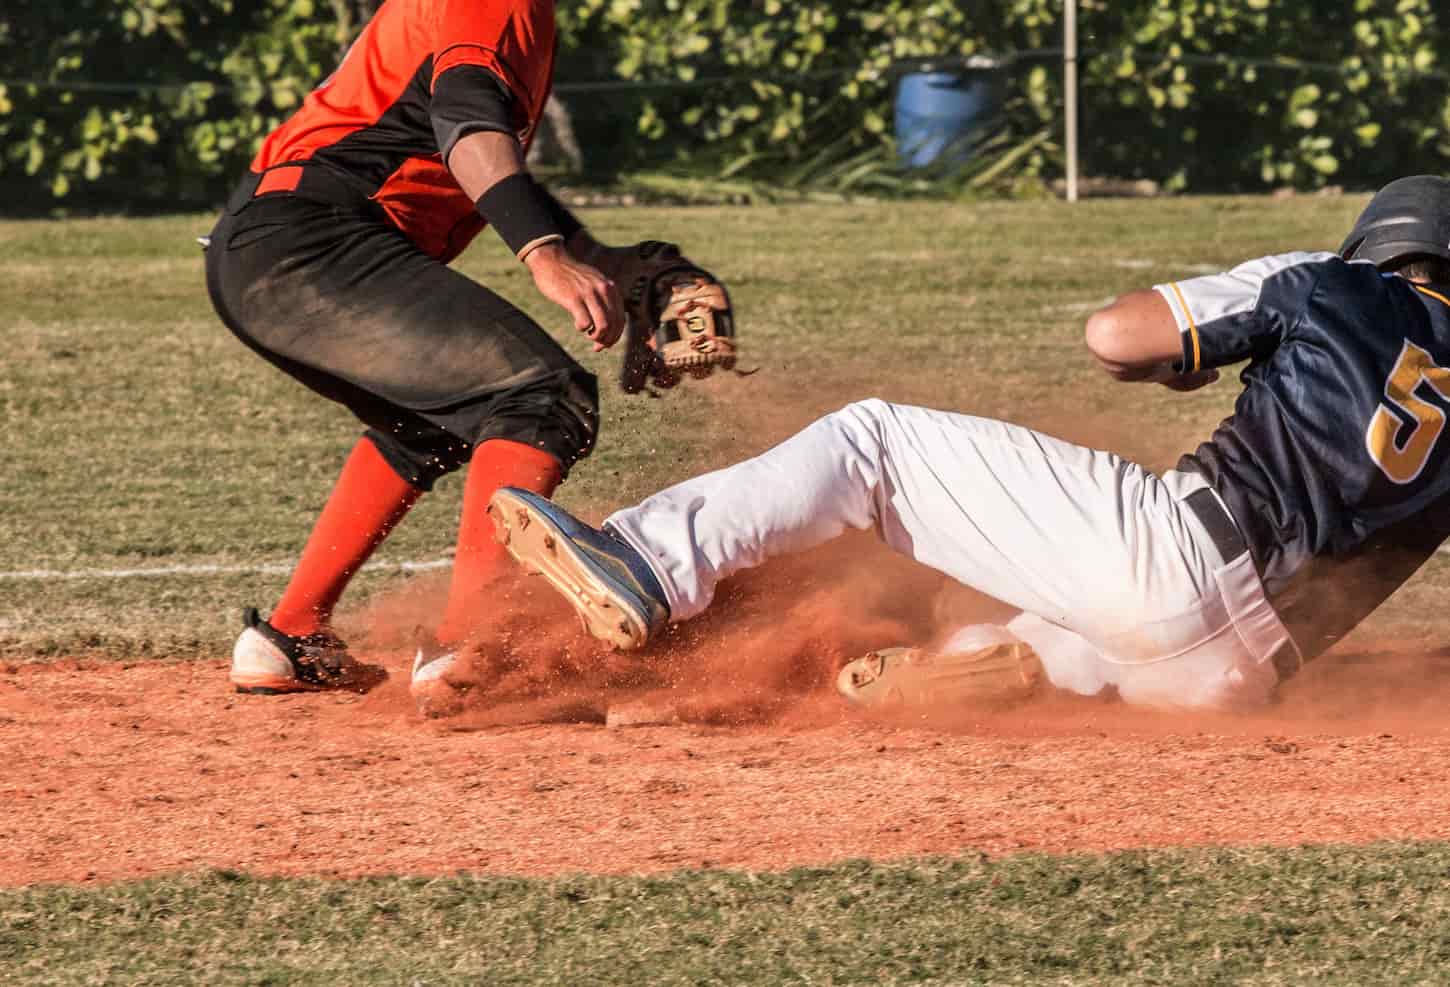 An image of a high school baseball game where a player is sliding into a base.